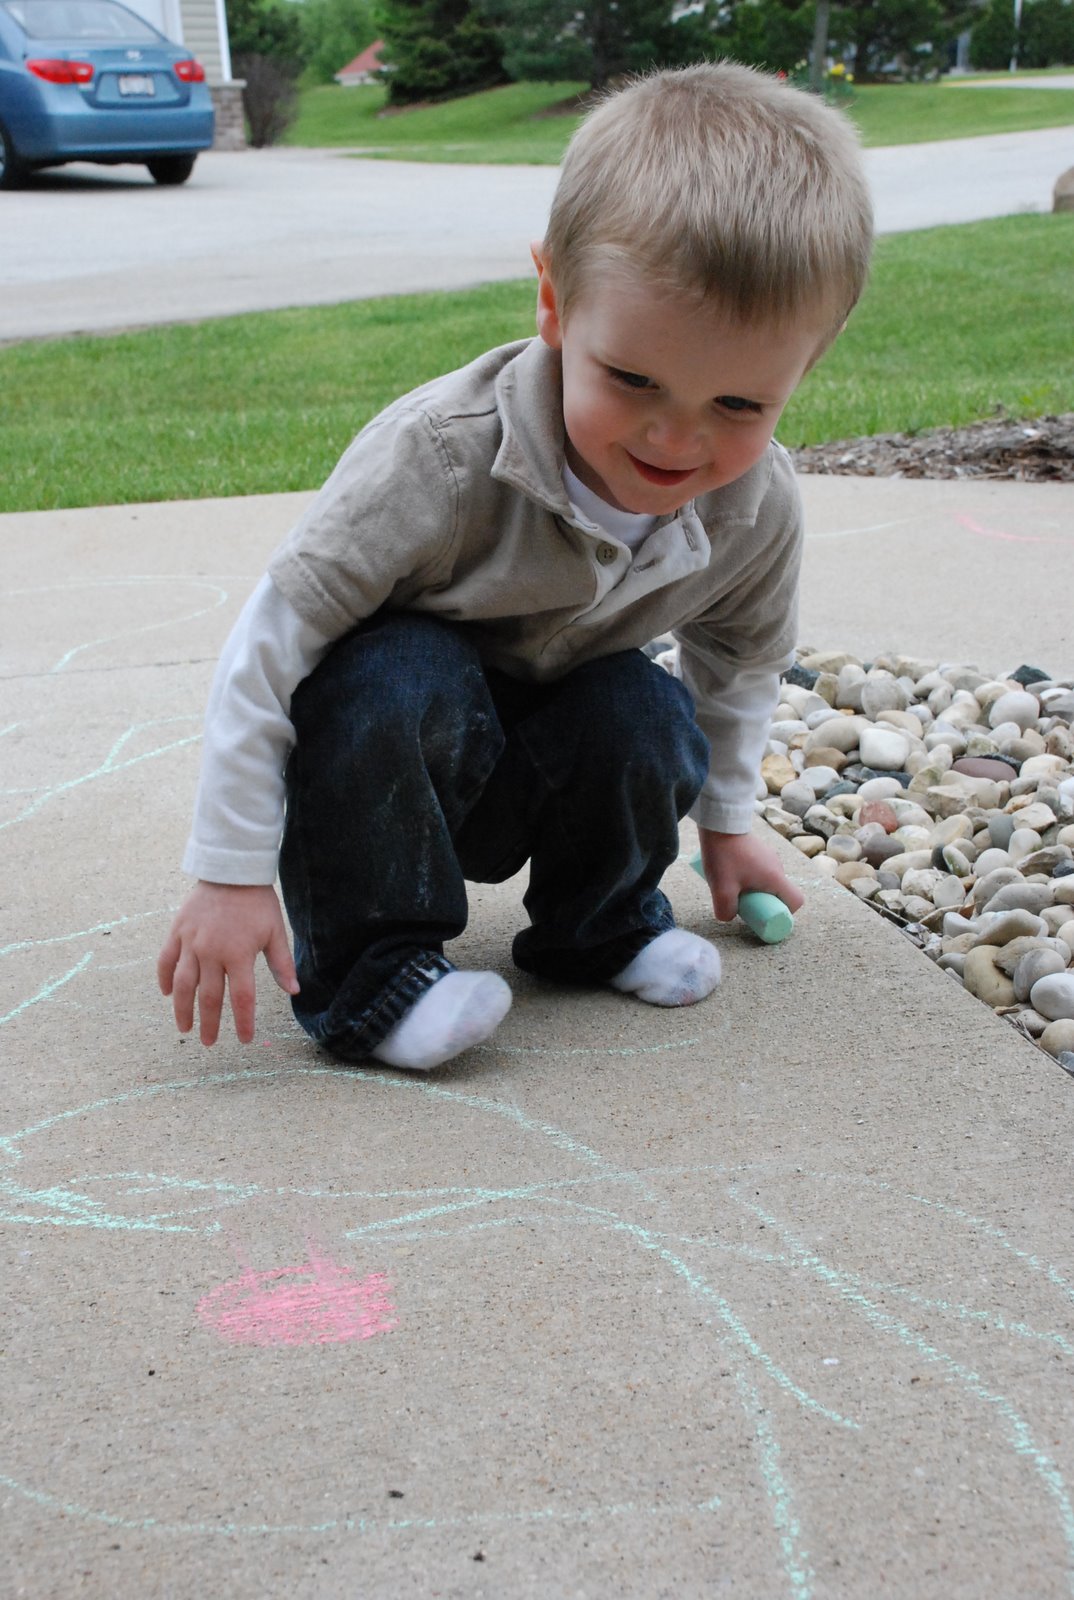 [playing+with+chalk+025.JPG]